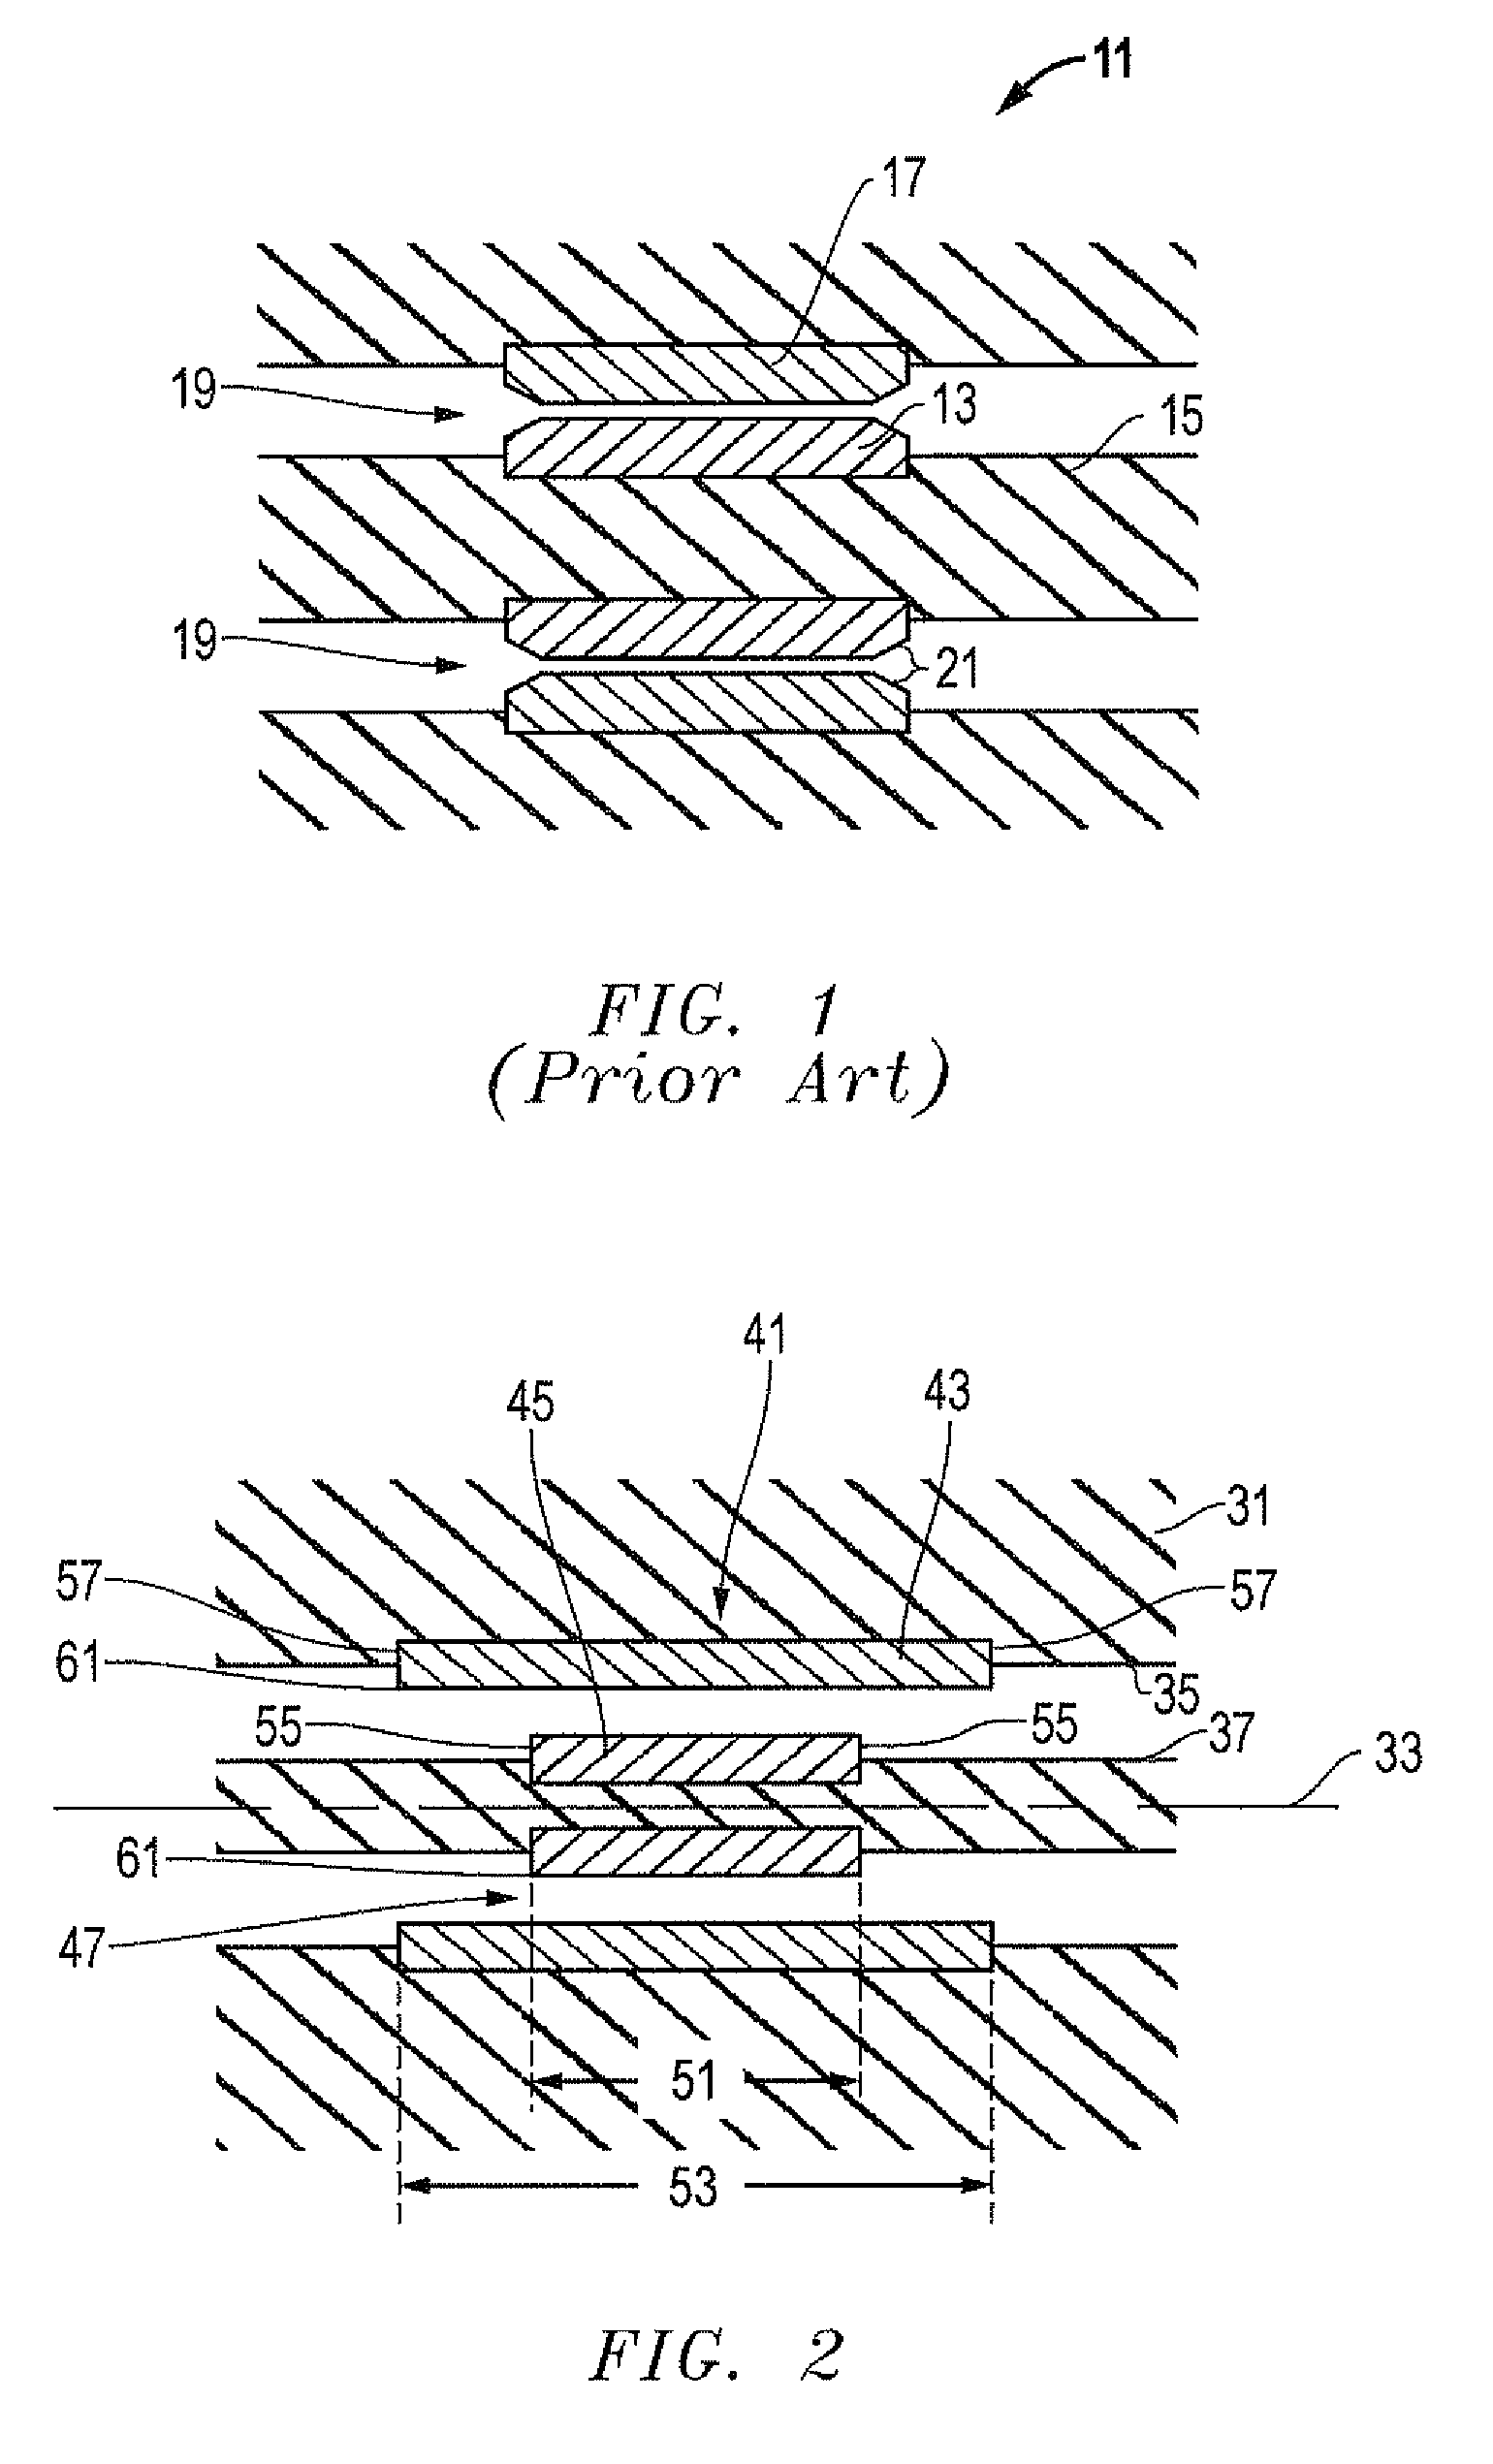 System, method and apparatus for scale resistant radial bearing for downhole rotating tool components and assemblies